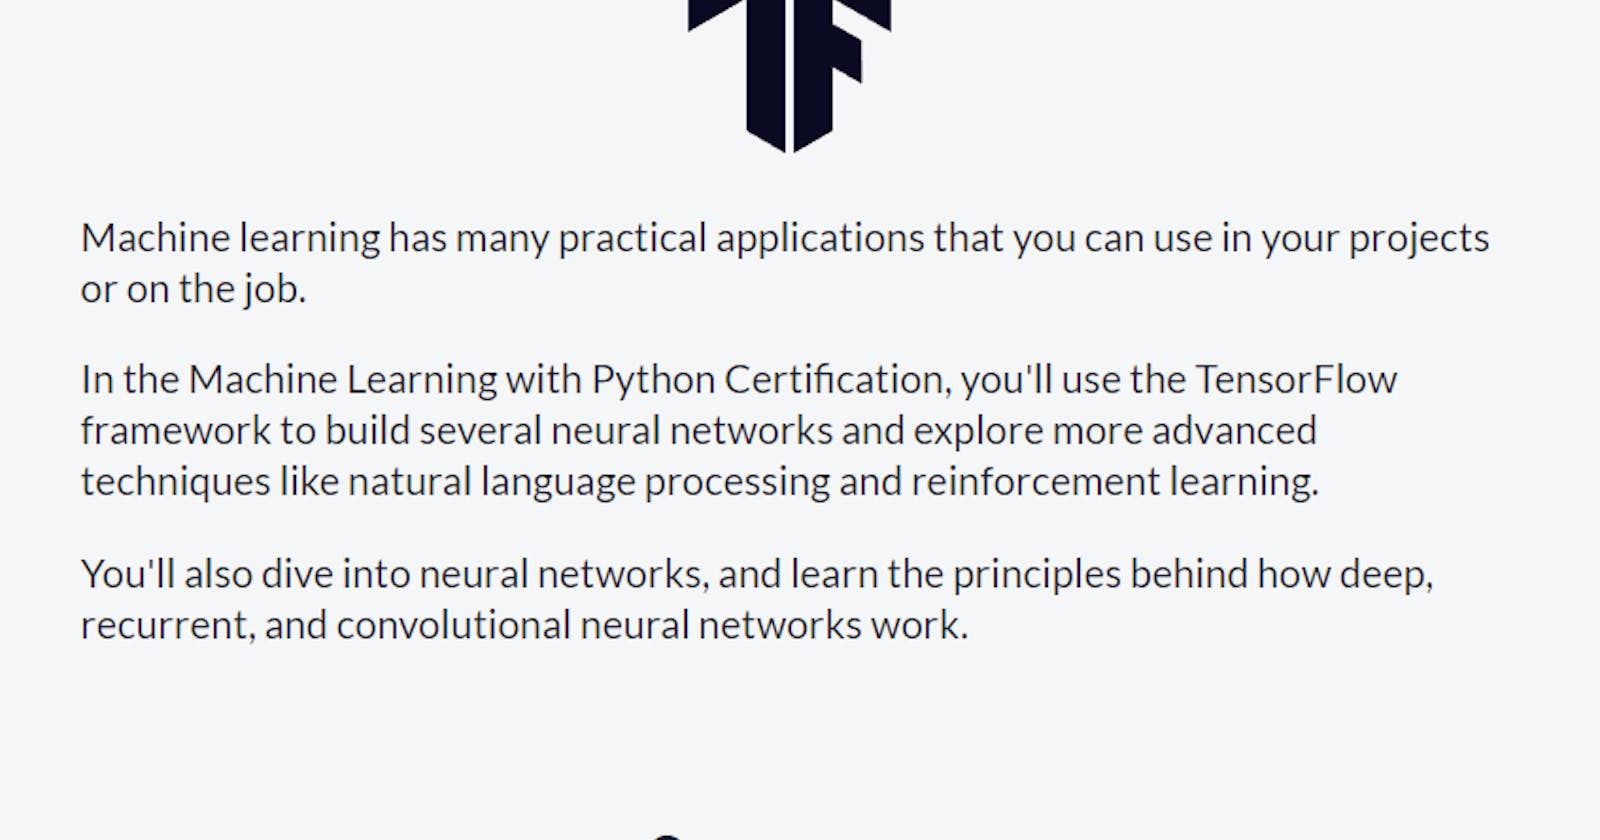 Found a free course on Tensorflow / Machine Learning.